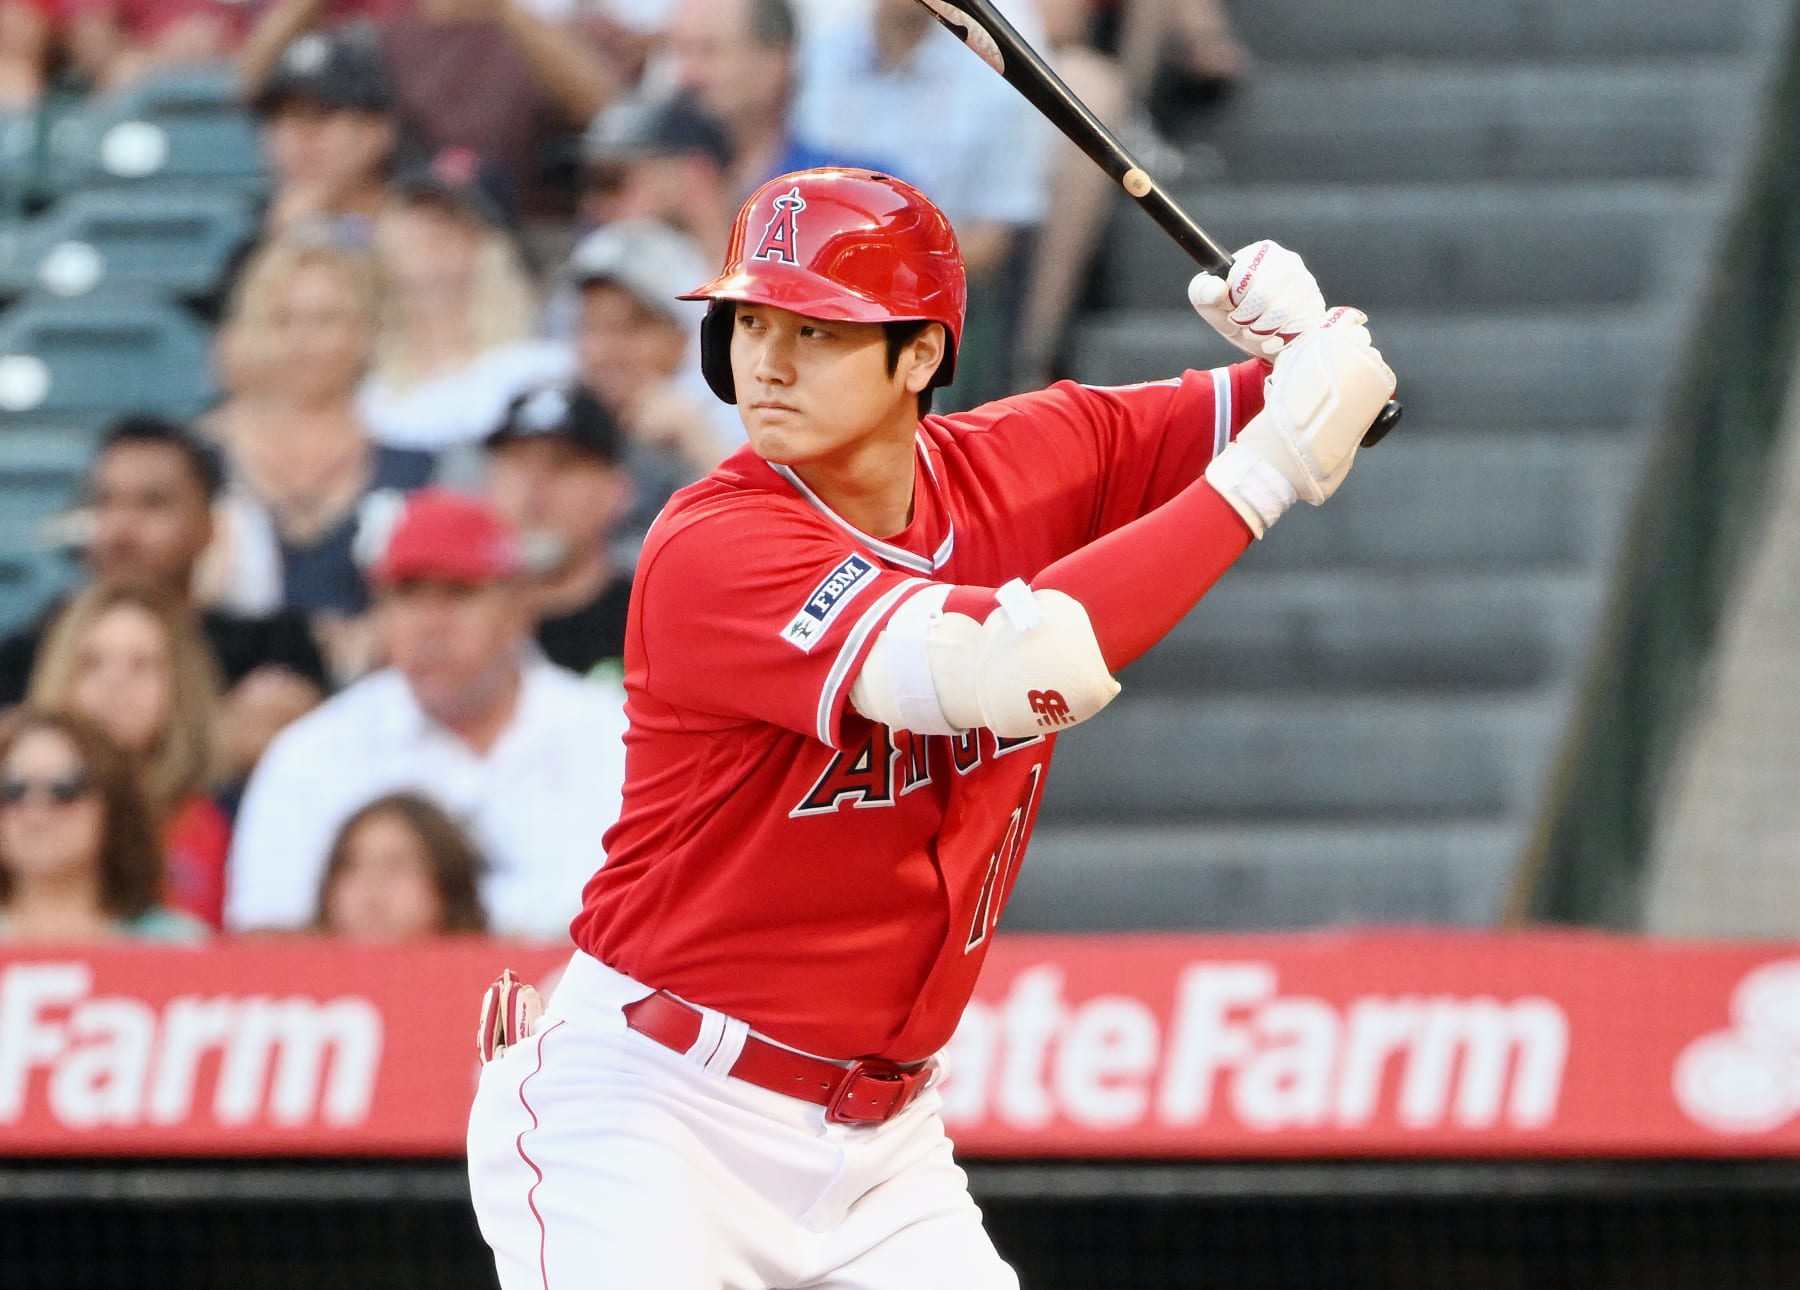 Angels Refuse to Trade Shohei Ohtani to Dodgers! LA Still Among